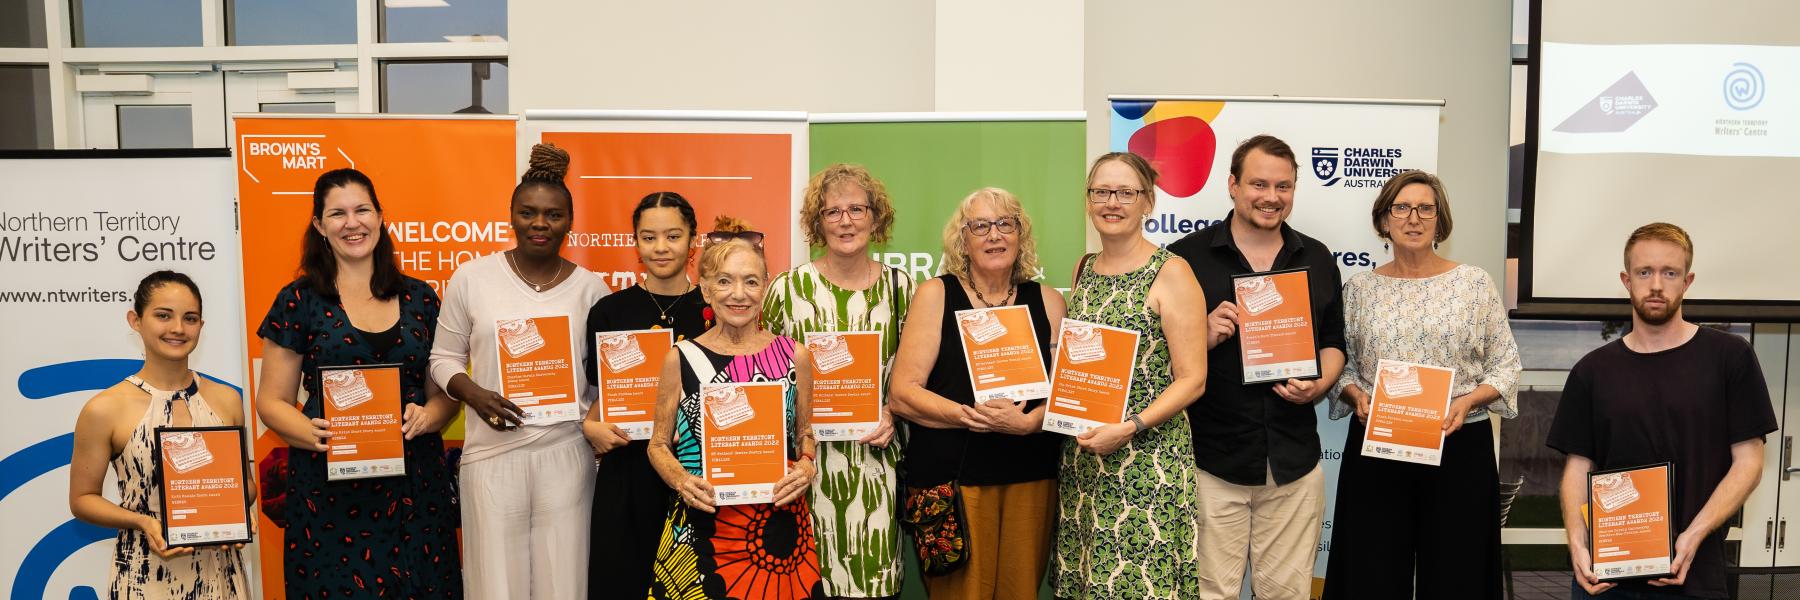 picture of people with certificates and banners in Darwin